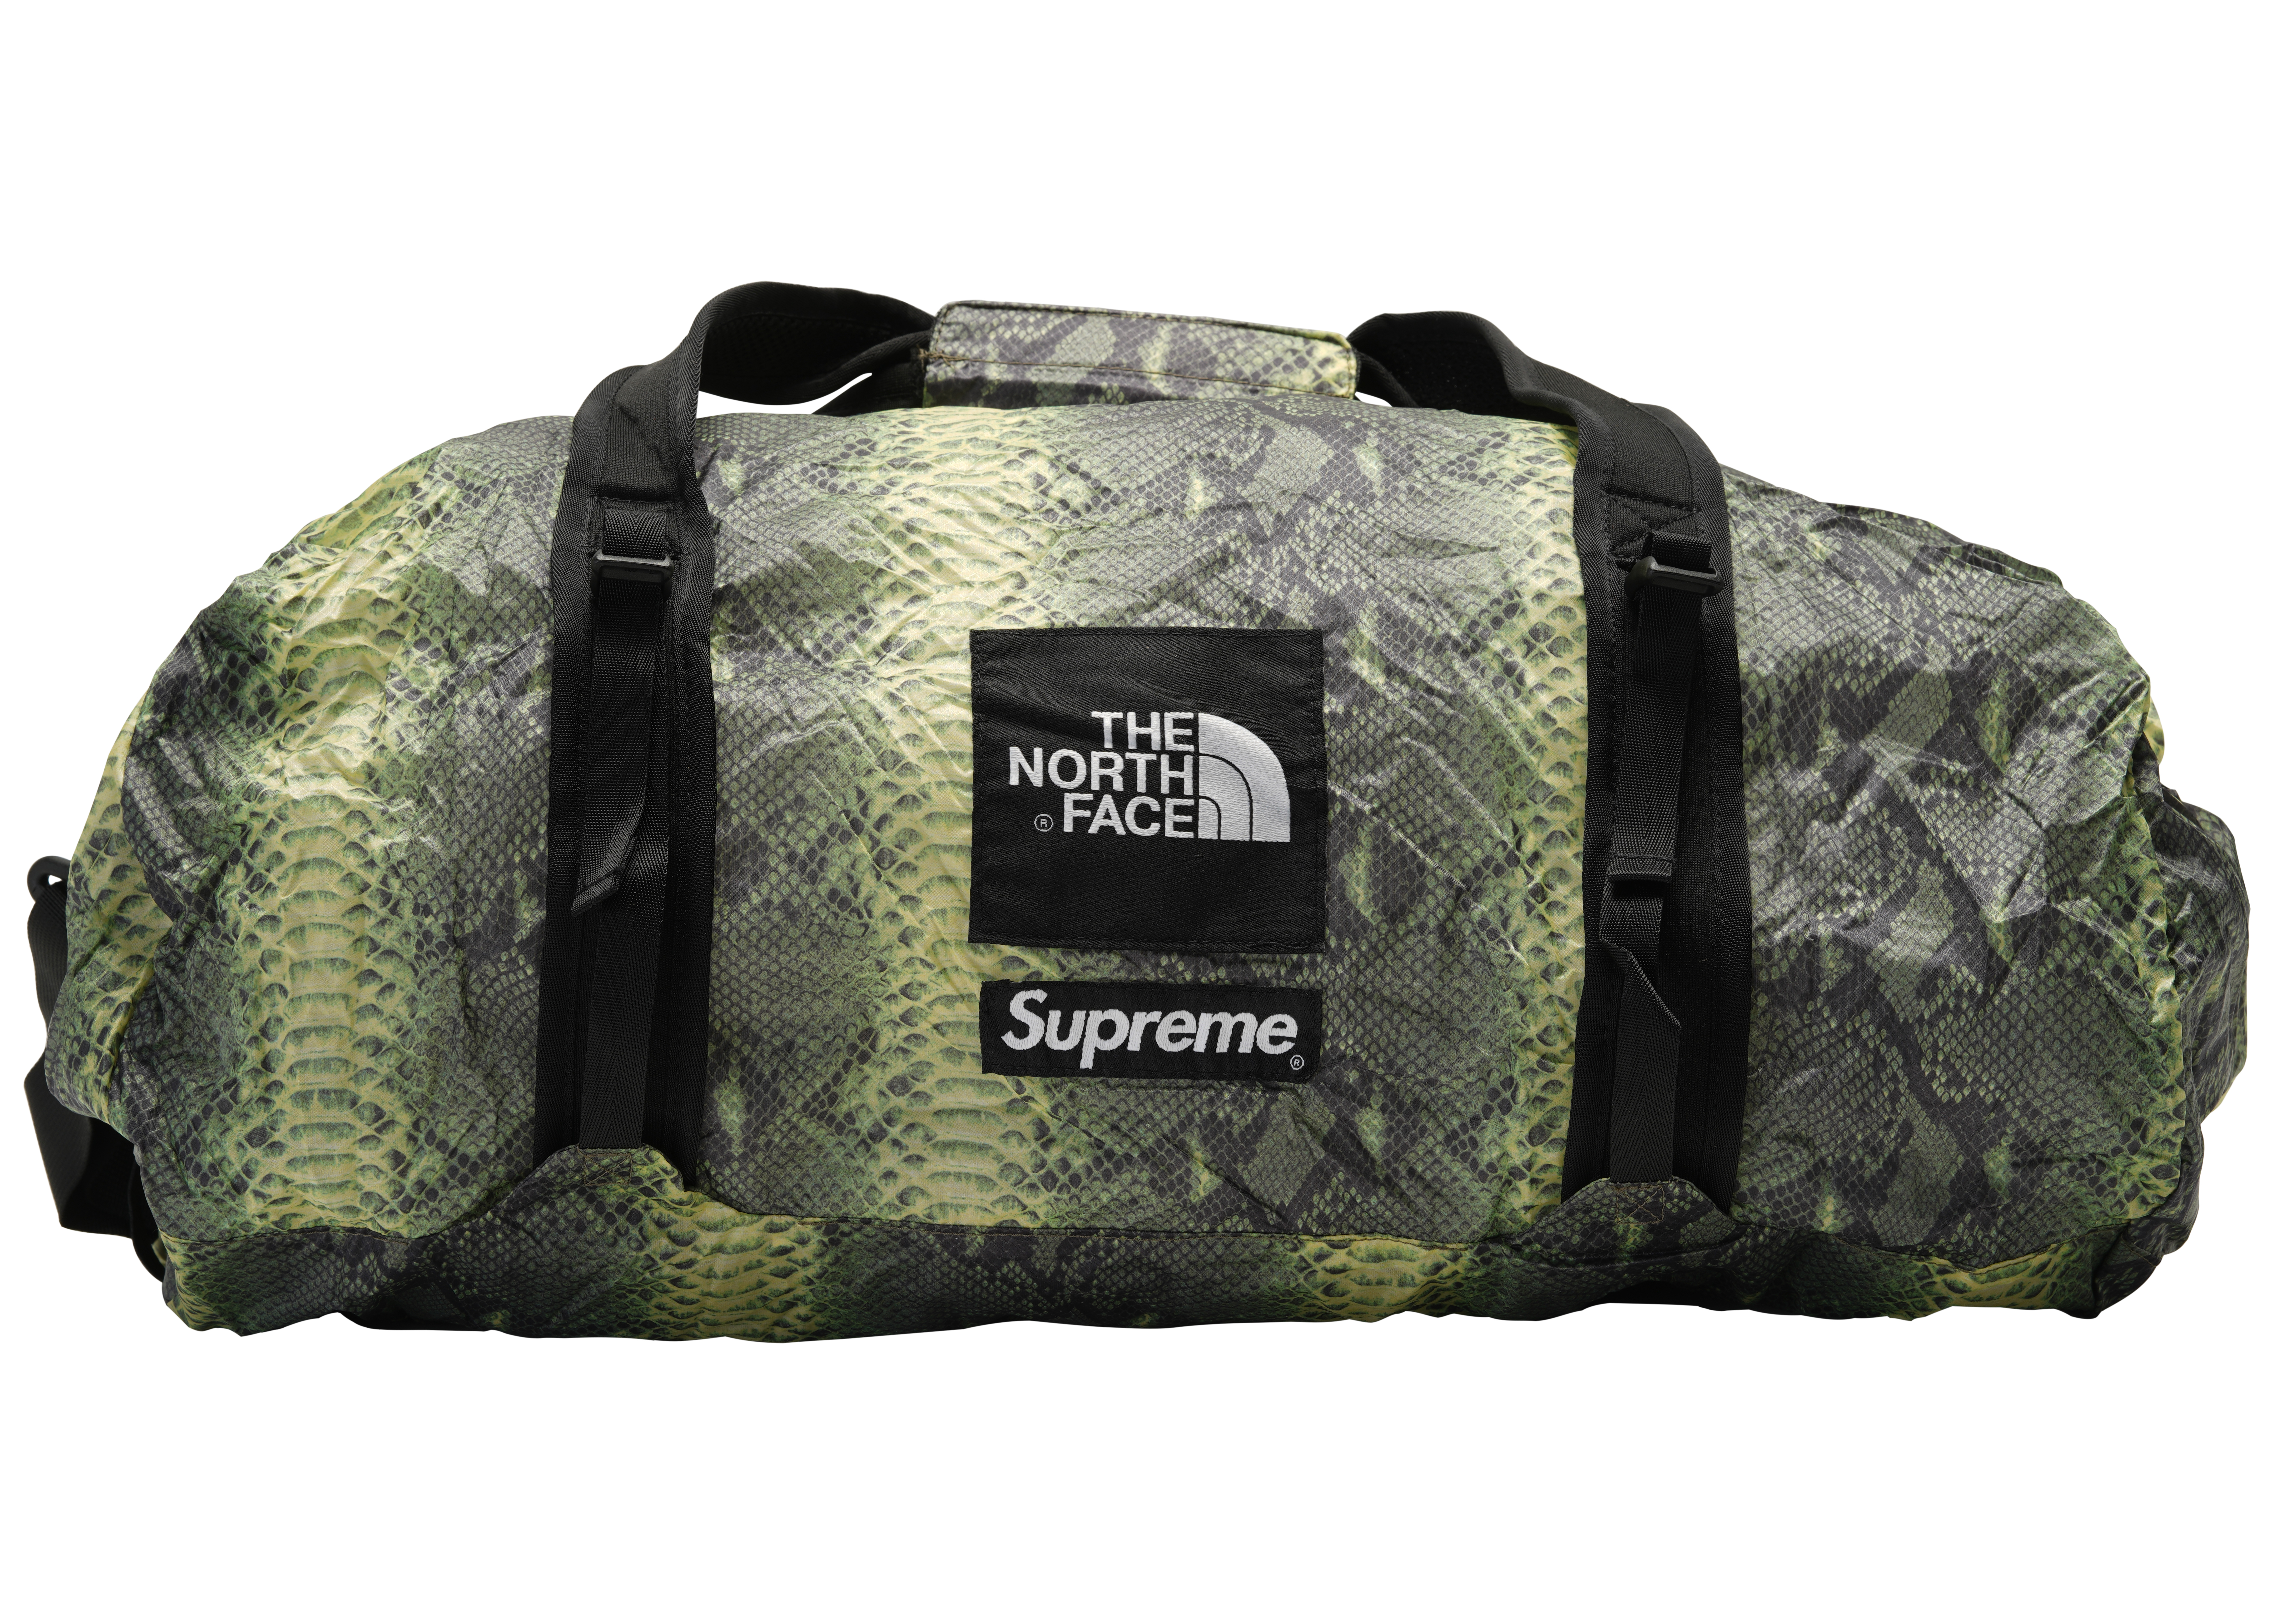 Supreme®/The North Face® Duffle Bag